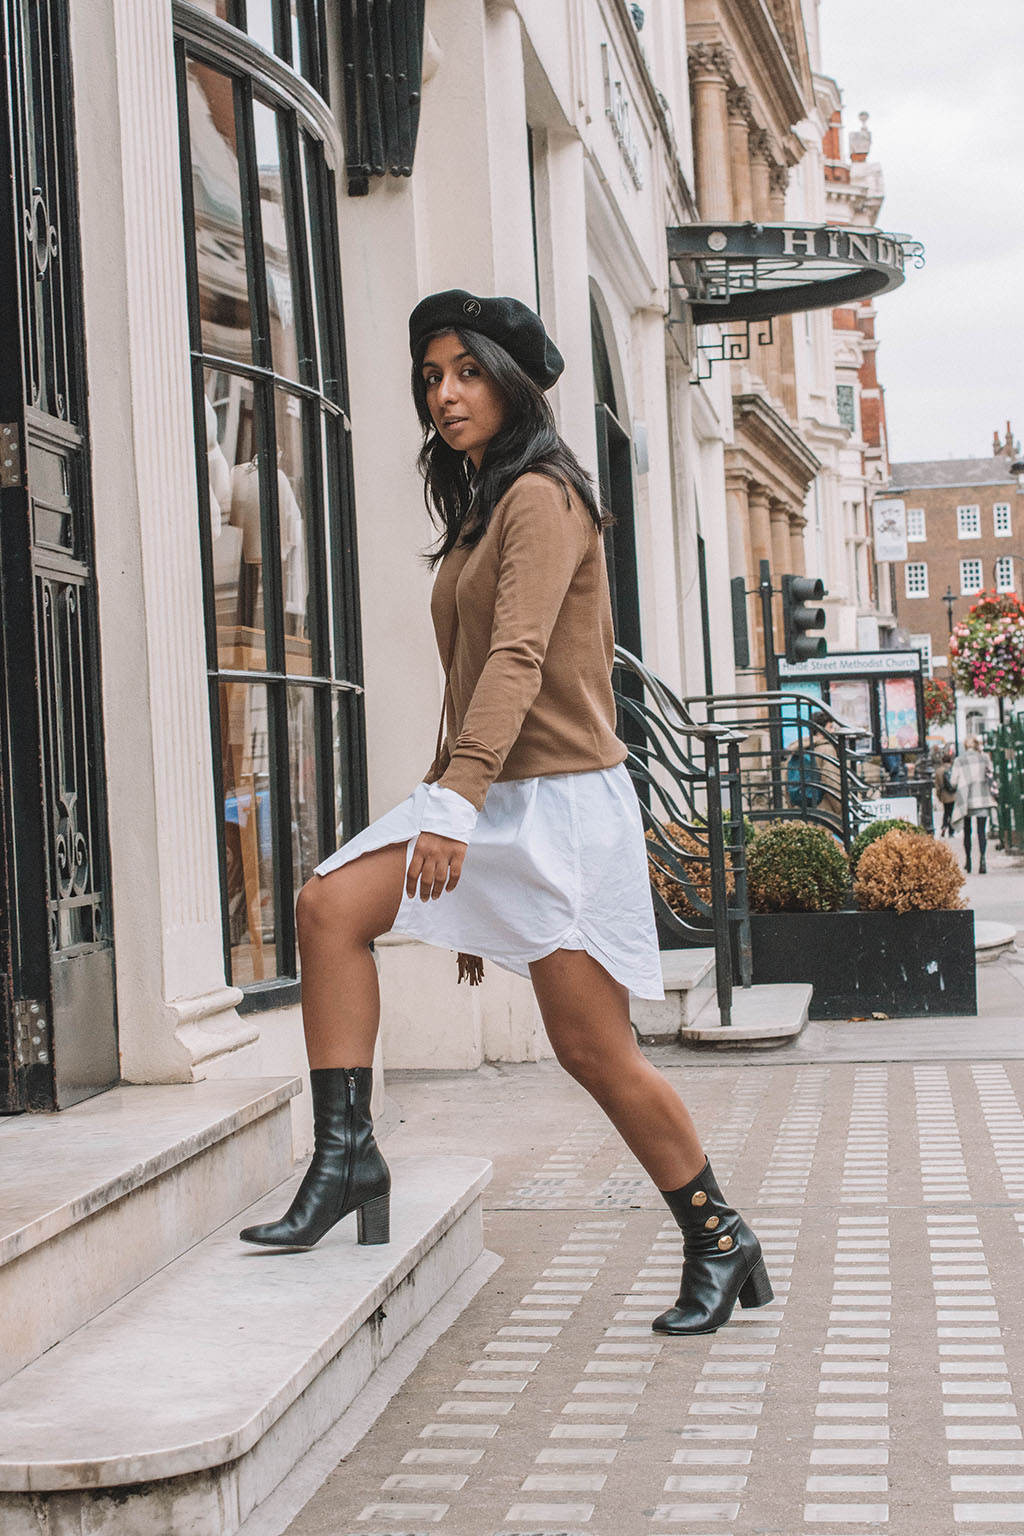 This Is How You Can Wear Your White Shirt Dress In The Autumn - The ...